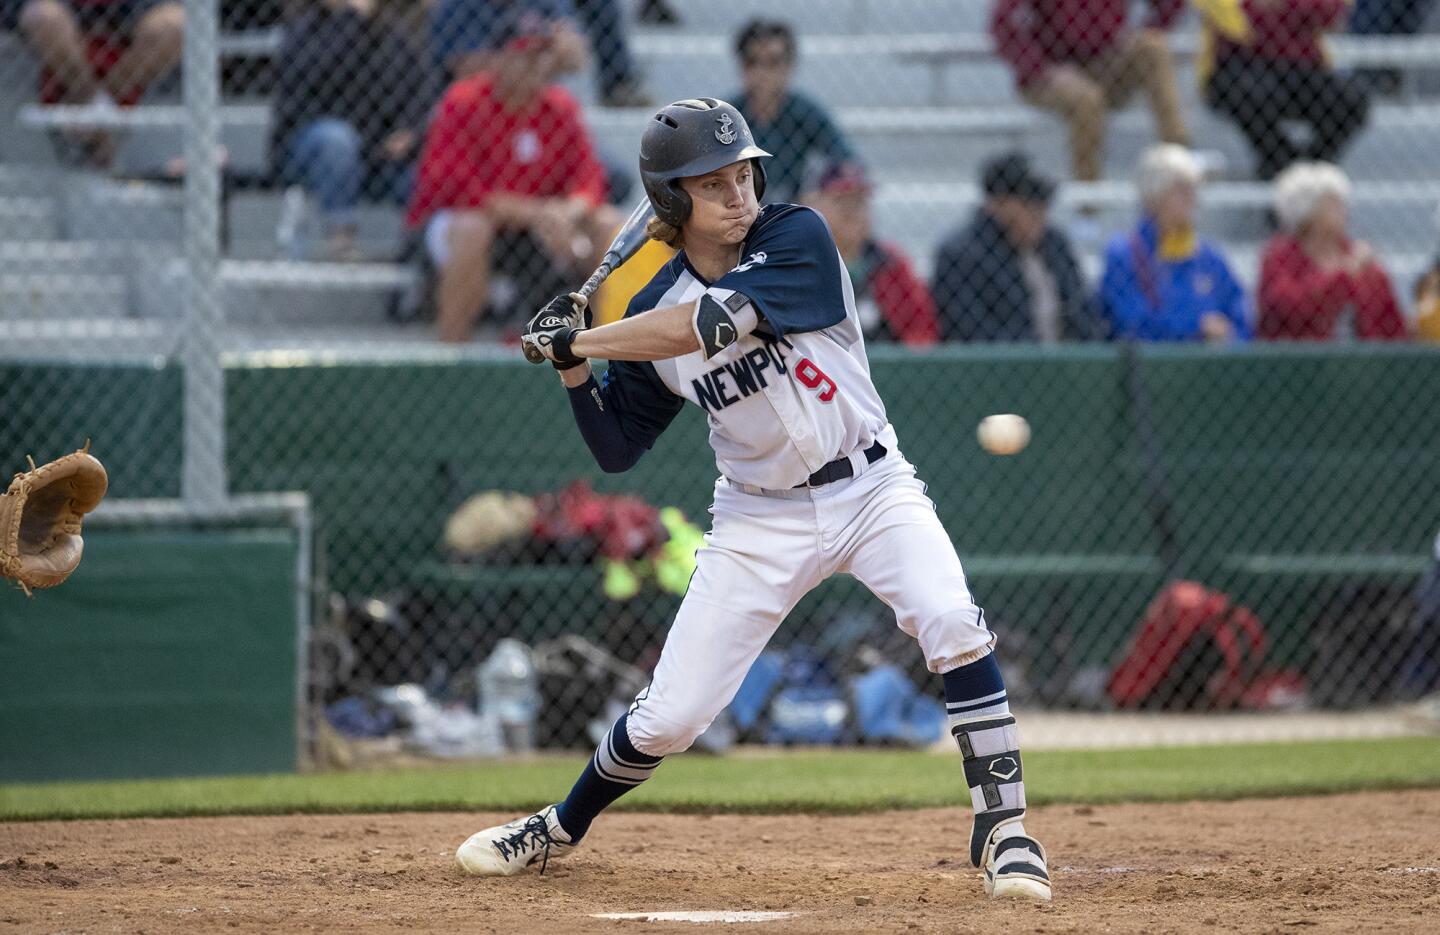 Newport Harbor's John Olmstead hits for the South in the fifth inning of the Kiwanis Club of Greater Anaheim's 52nd Orange County High School All-Star Baseball Game for seniors at La Palma Park's Dee Fee Field in Anaheim on Tuesday.